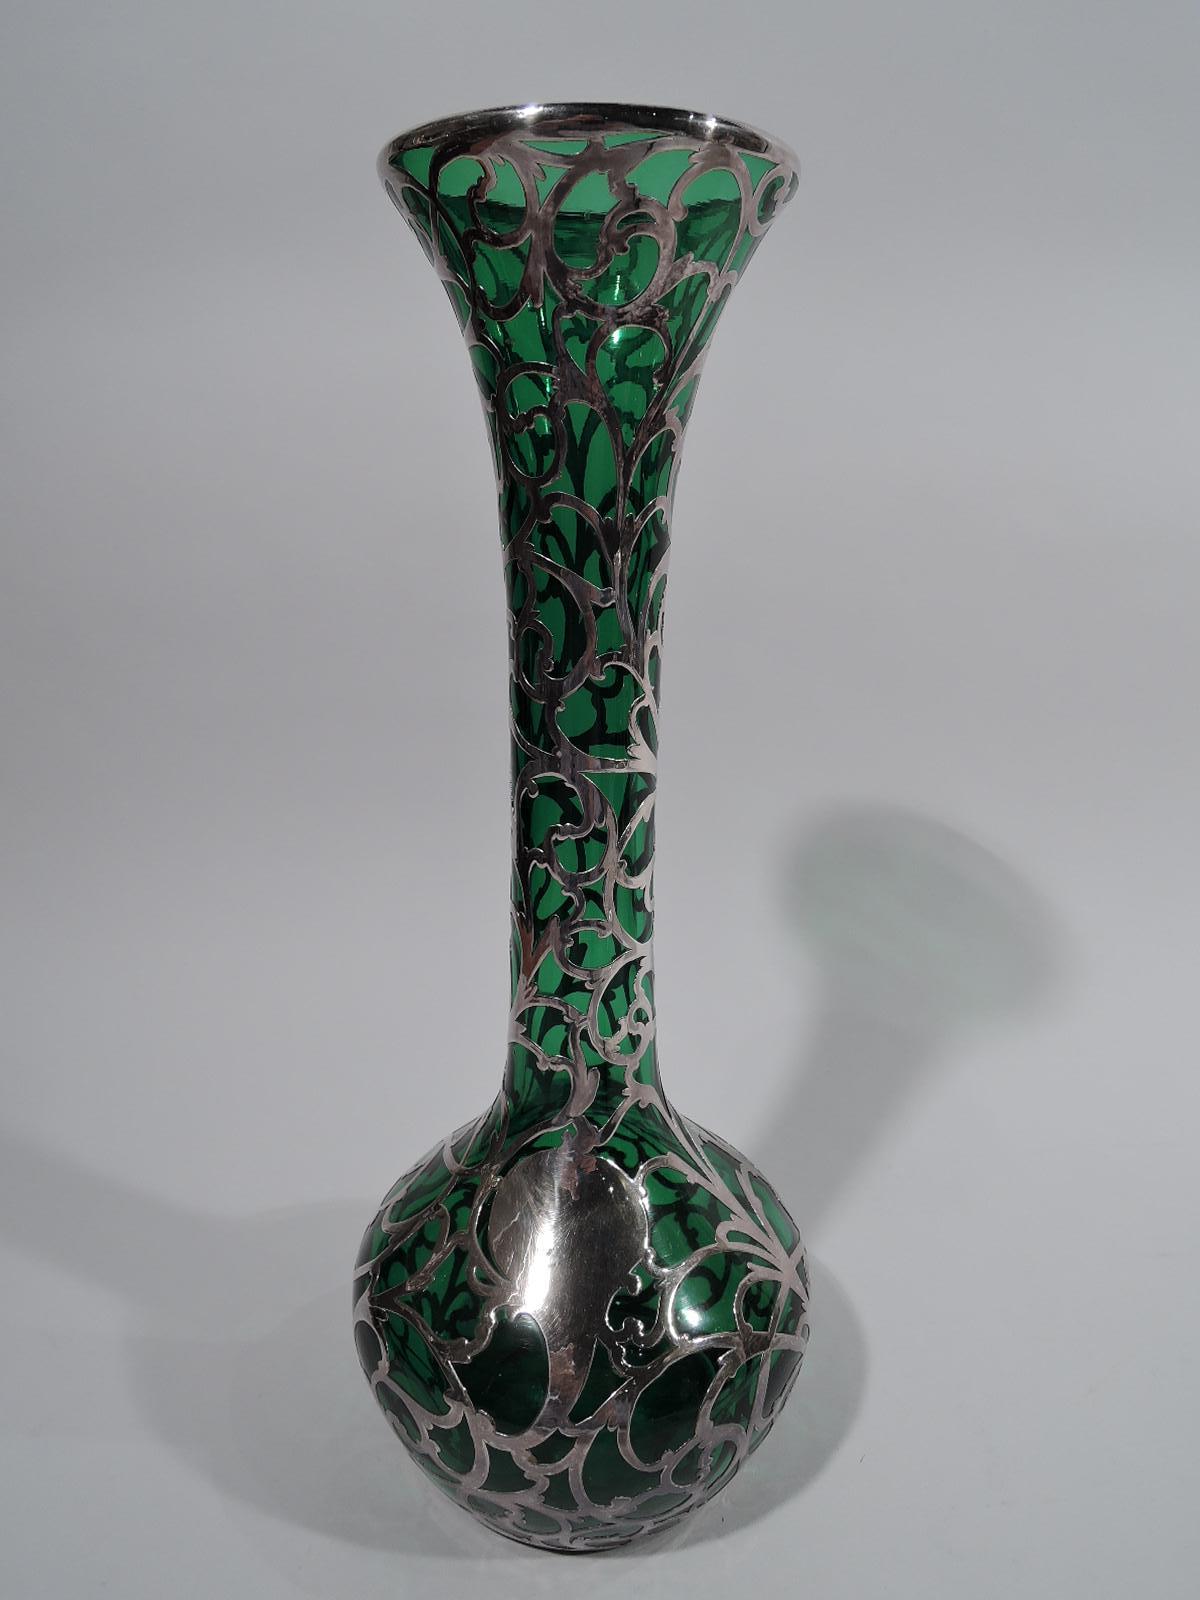 Turn-of-the-century Art Nouveau glass vase with silver overlay. Made by Alvin in Providence. Tall cylindrical neck with flared mouth; globular bowl. Scrolled overlay with asymmetrical cartouche (vacant). Glass is dark green. Faint marks including